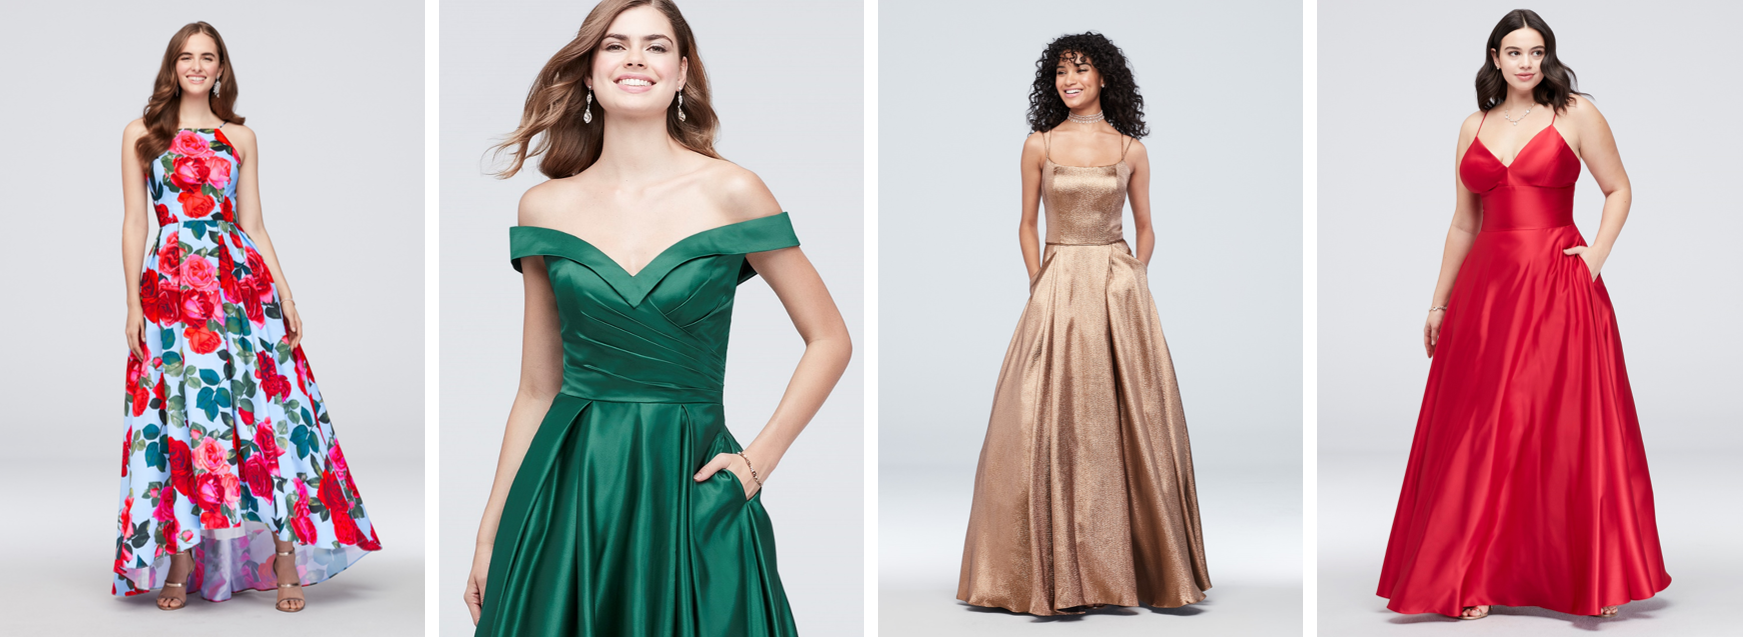 Four girls smiling in prom dresses with pockets of various colors and styles